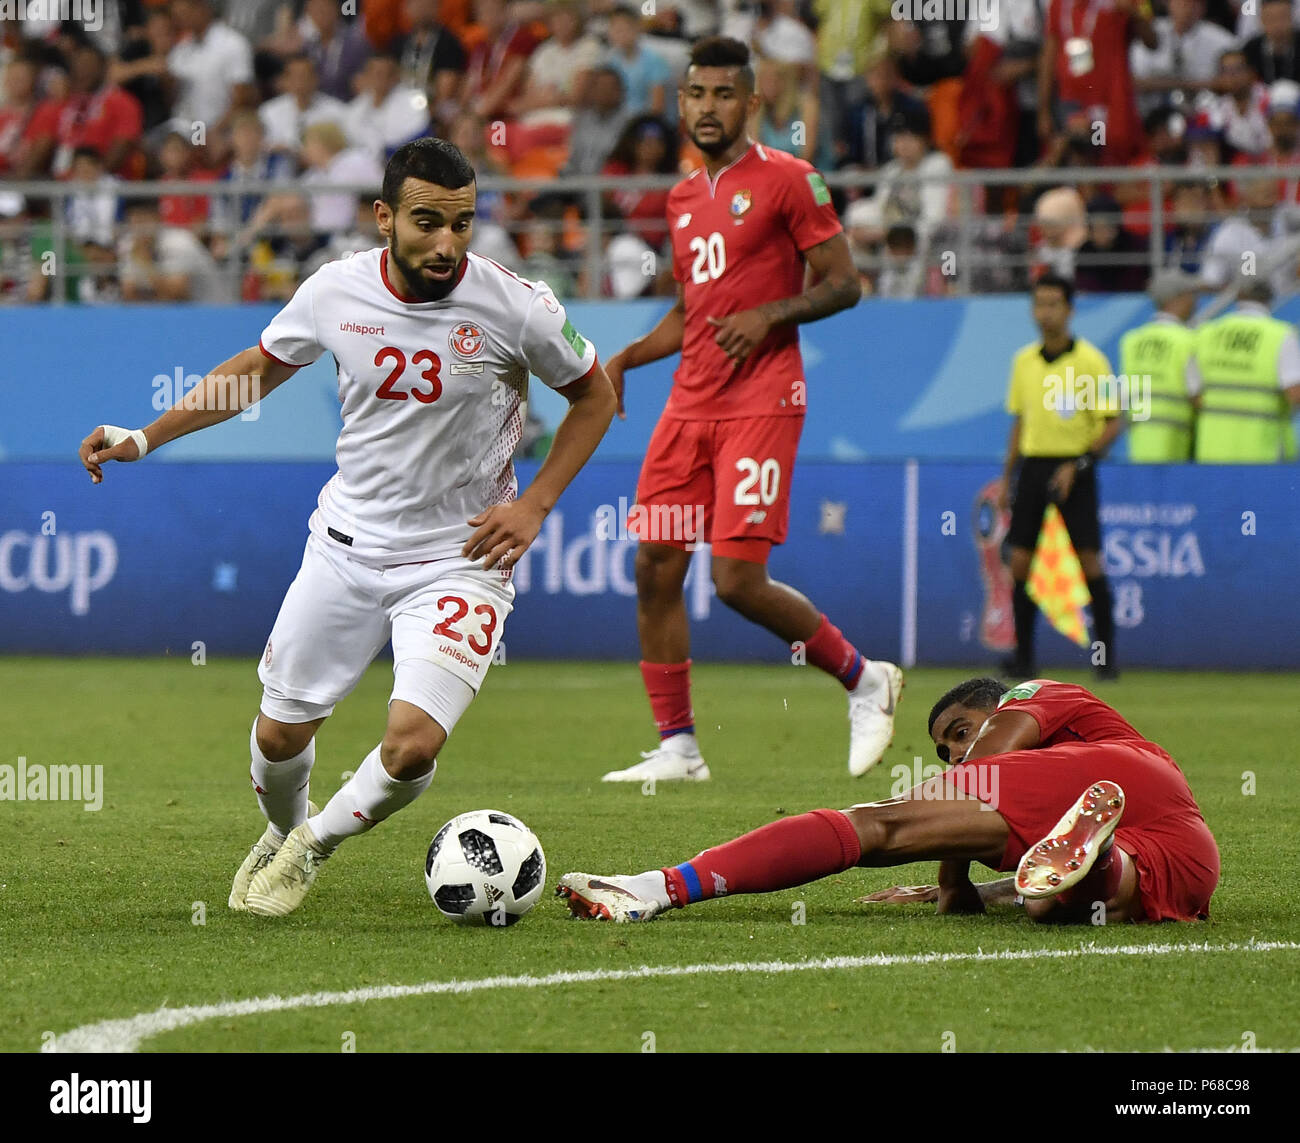 Saransk, Russia. 28th June, 2018. Naim Sliti (L) of Tunisia breaks through with the ball during the 2018 FIFA World Cup Group G match between Panama and Tunisia in Saransk, Russia, June 28, 2018. Credit: He Canling/Xinhua/Alamy Live News Stock Photo